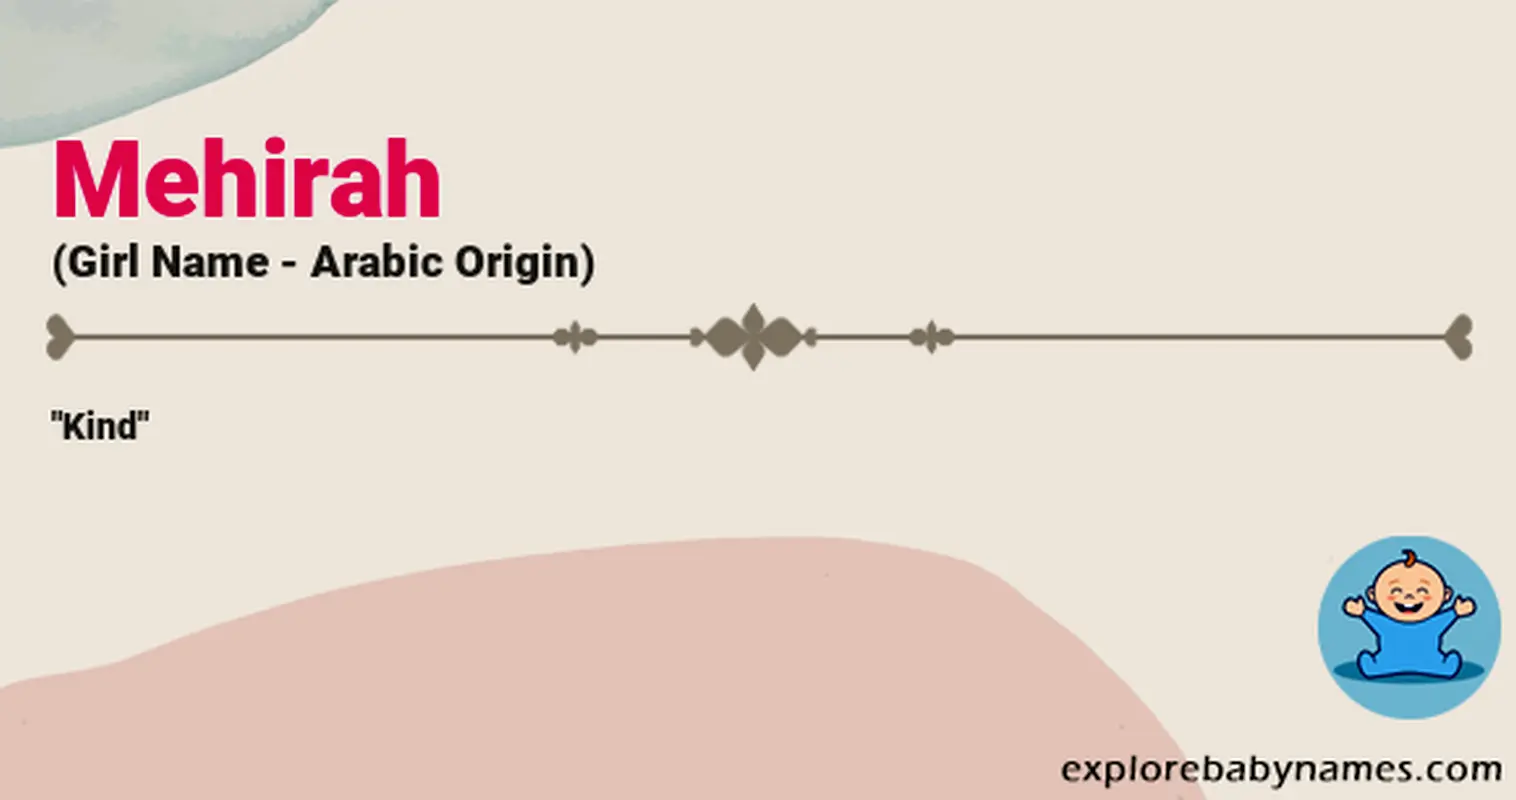 Meaning of Mehirah